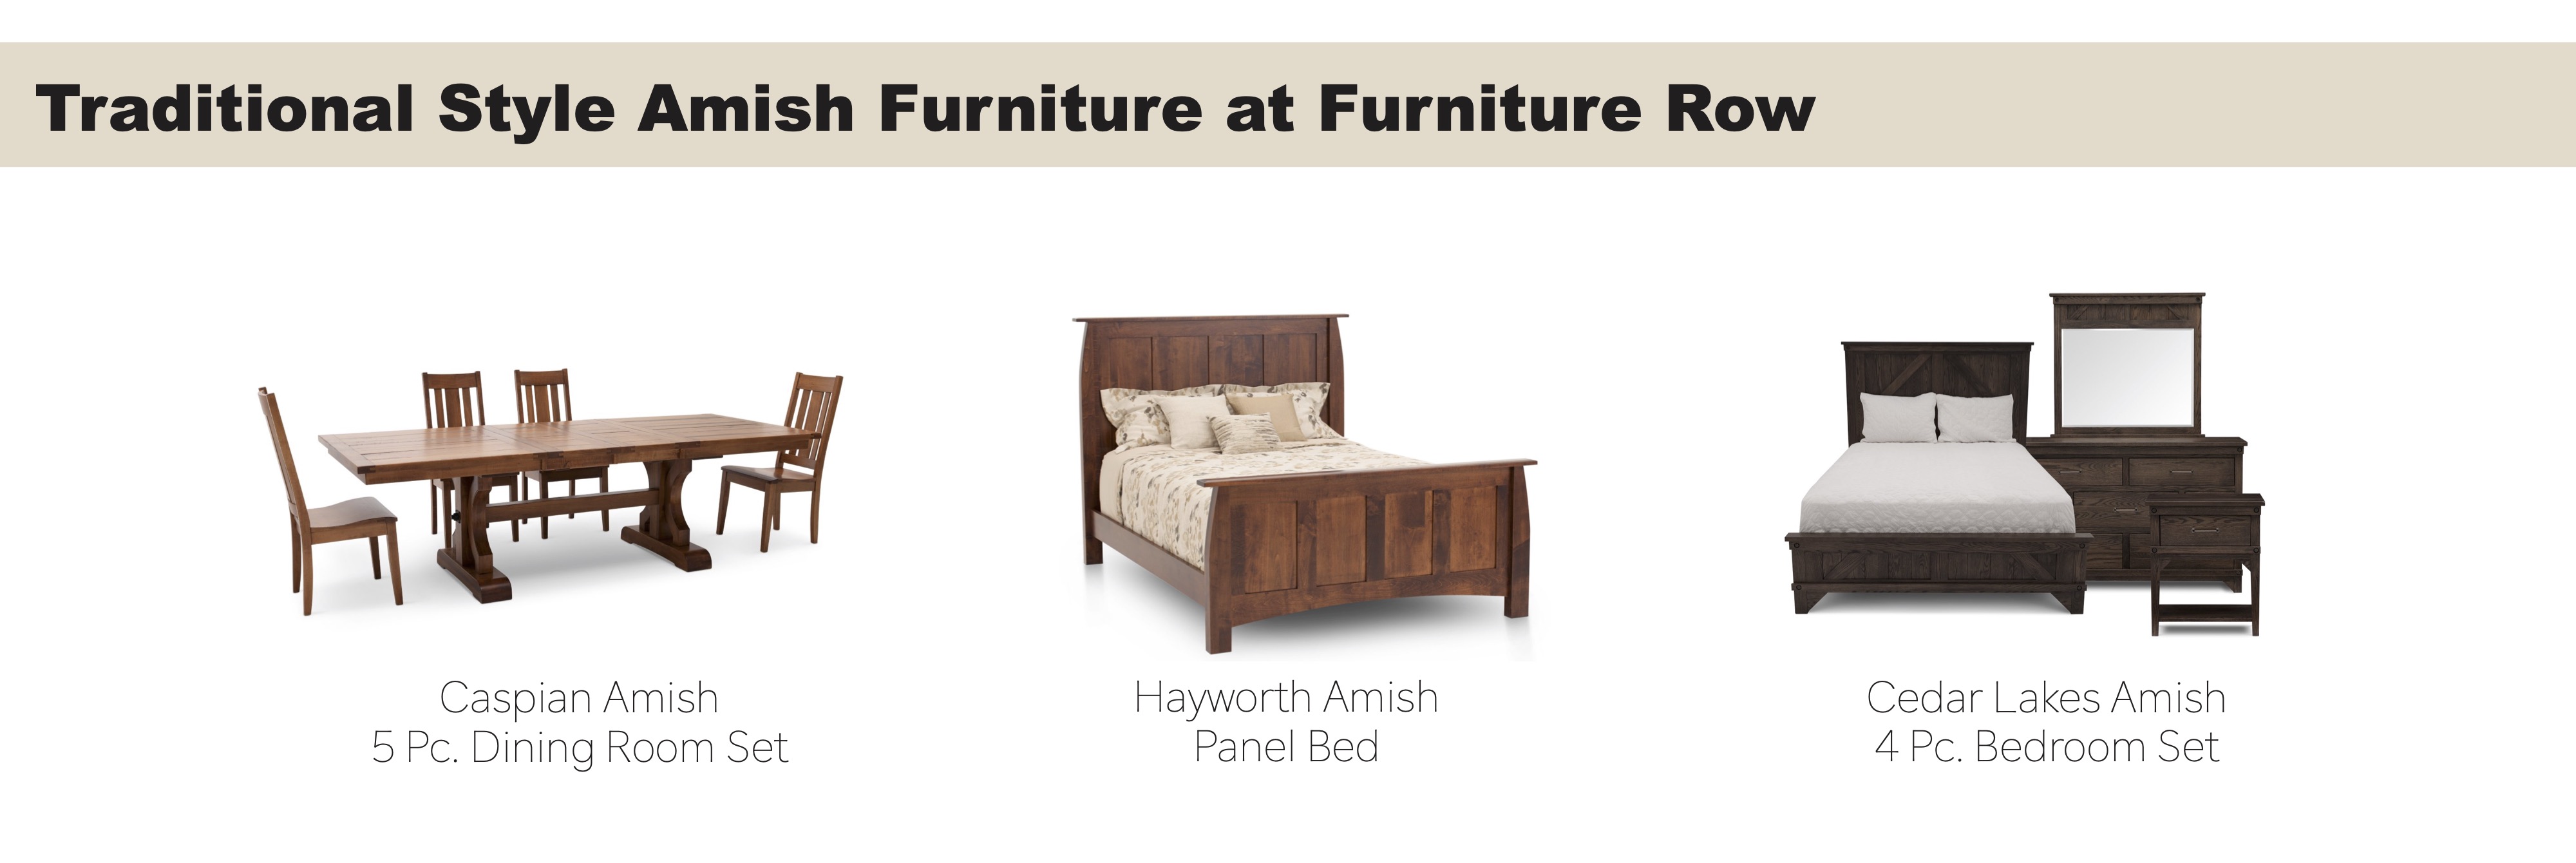 Traditional Amish Furniture at Furniture Row